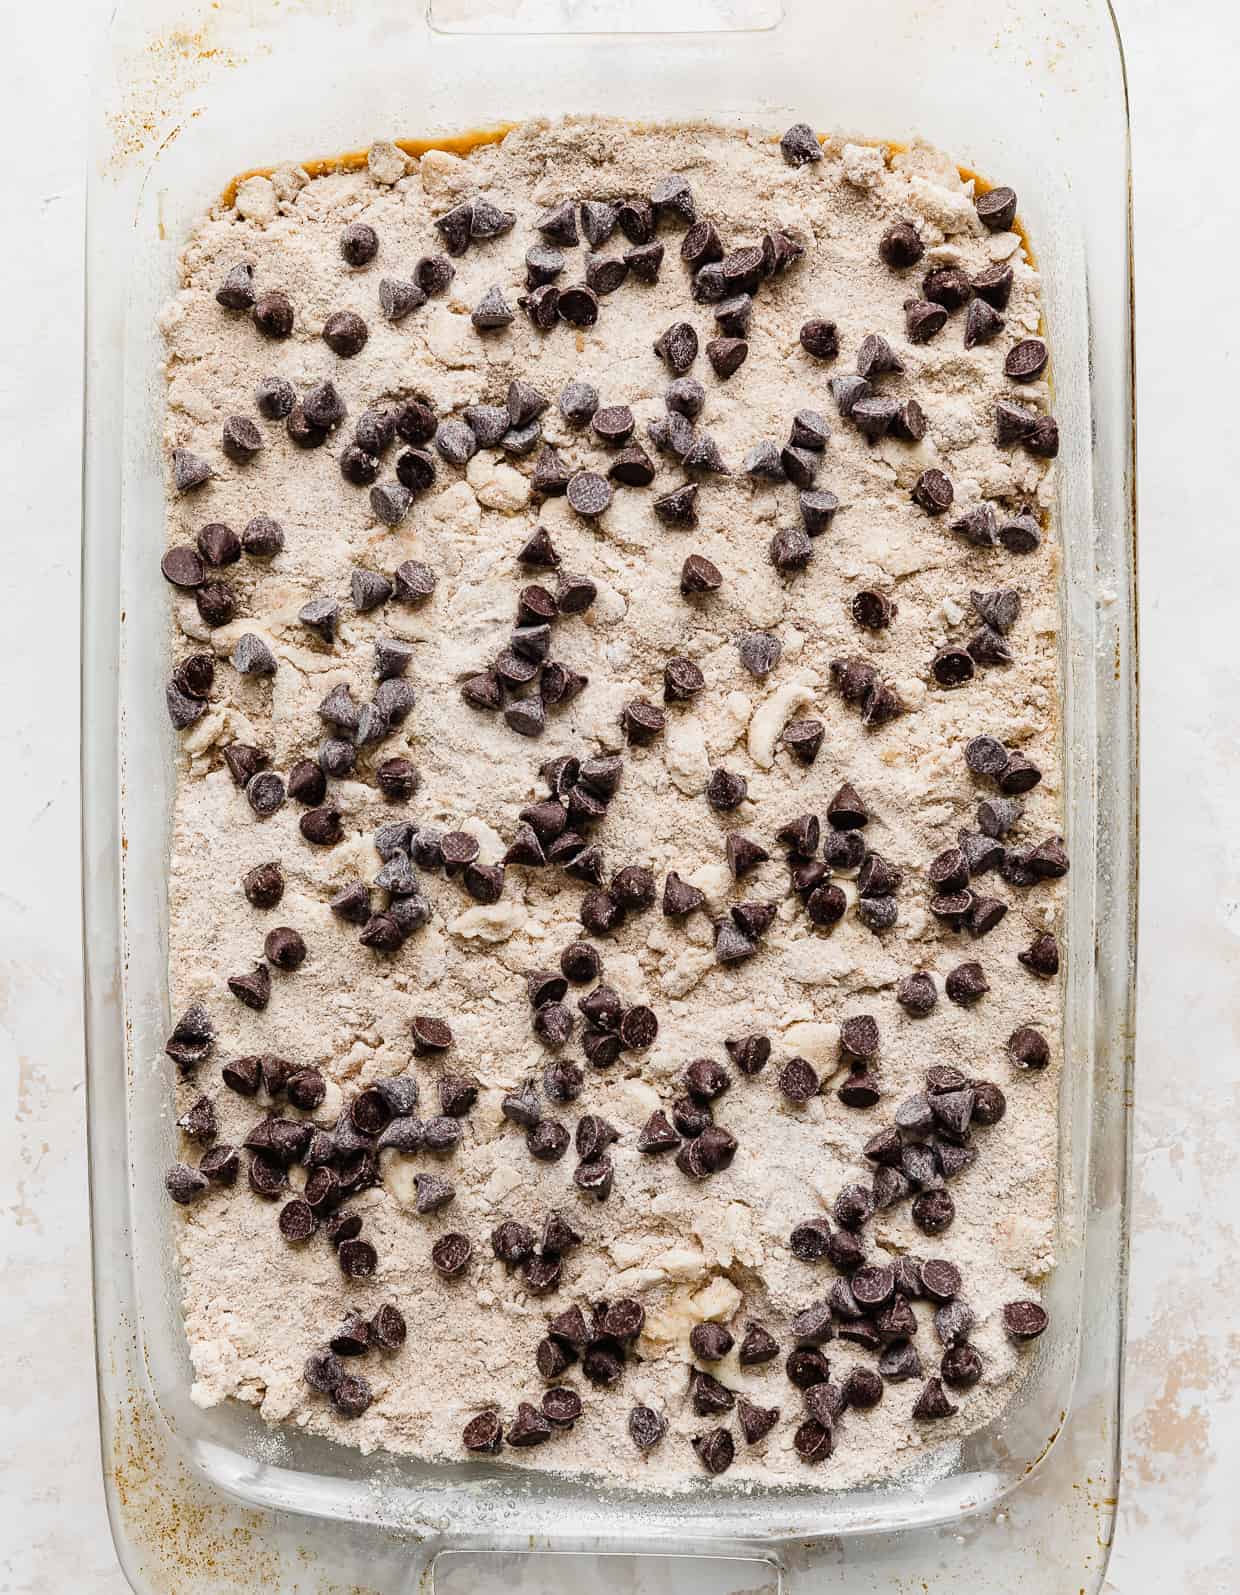 Pumpkin Chocolate Chip Coffee Cake topped with a sand colored crumble and chocolate chips in a baking dish.